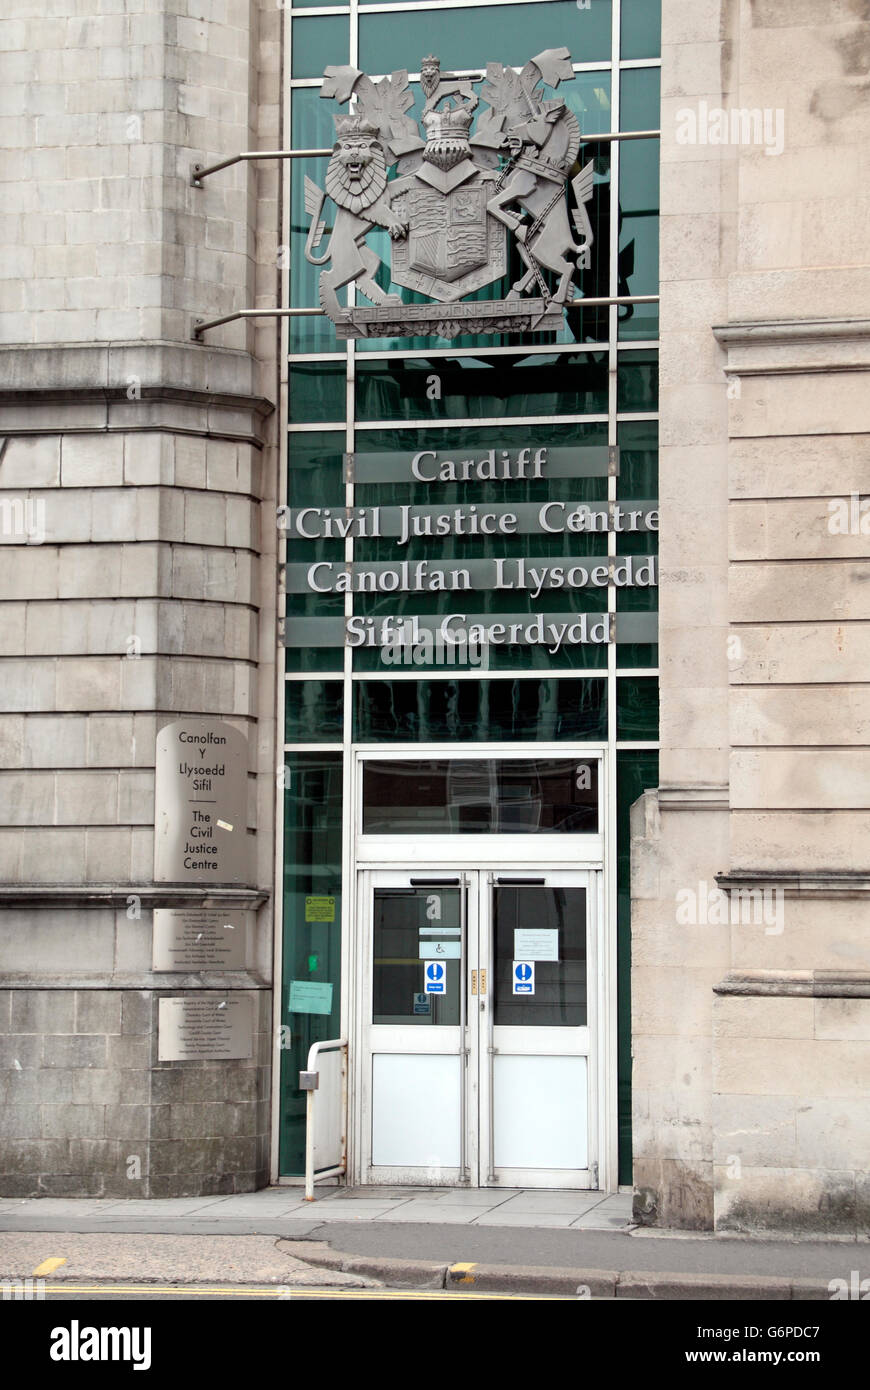 The Cardiff Civil Justice Centre in Park Street, Cardiff, Wales. Stock Photo